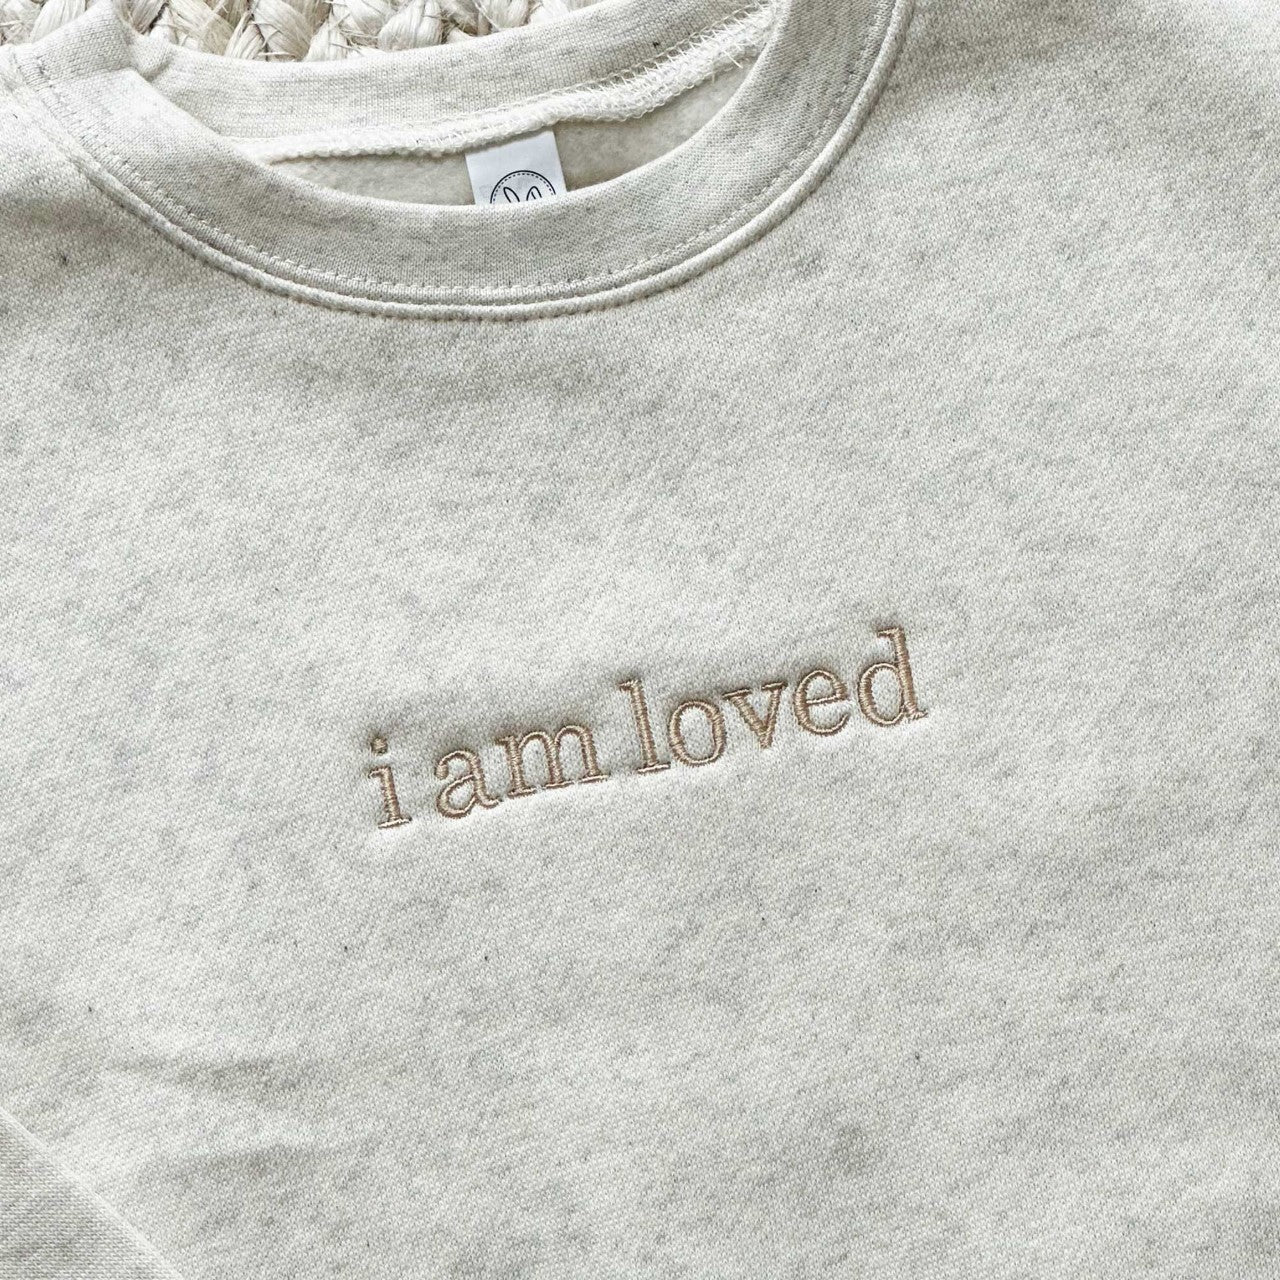 close up of the embroidery i am loved on a heather oatmeal crewneck sweatshirt